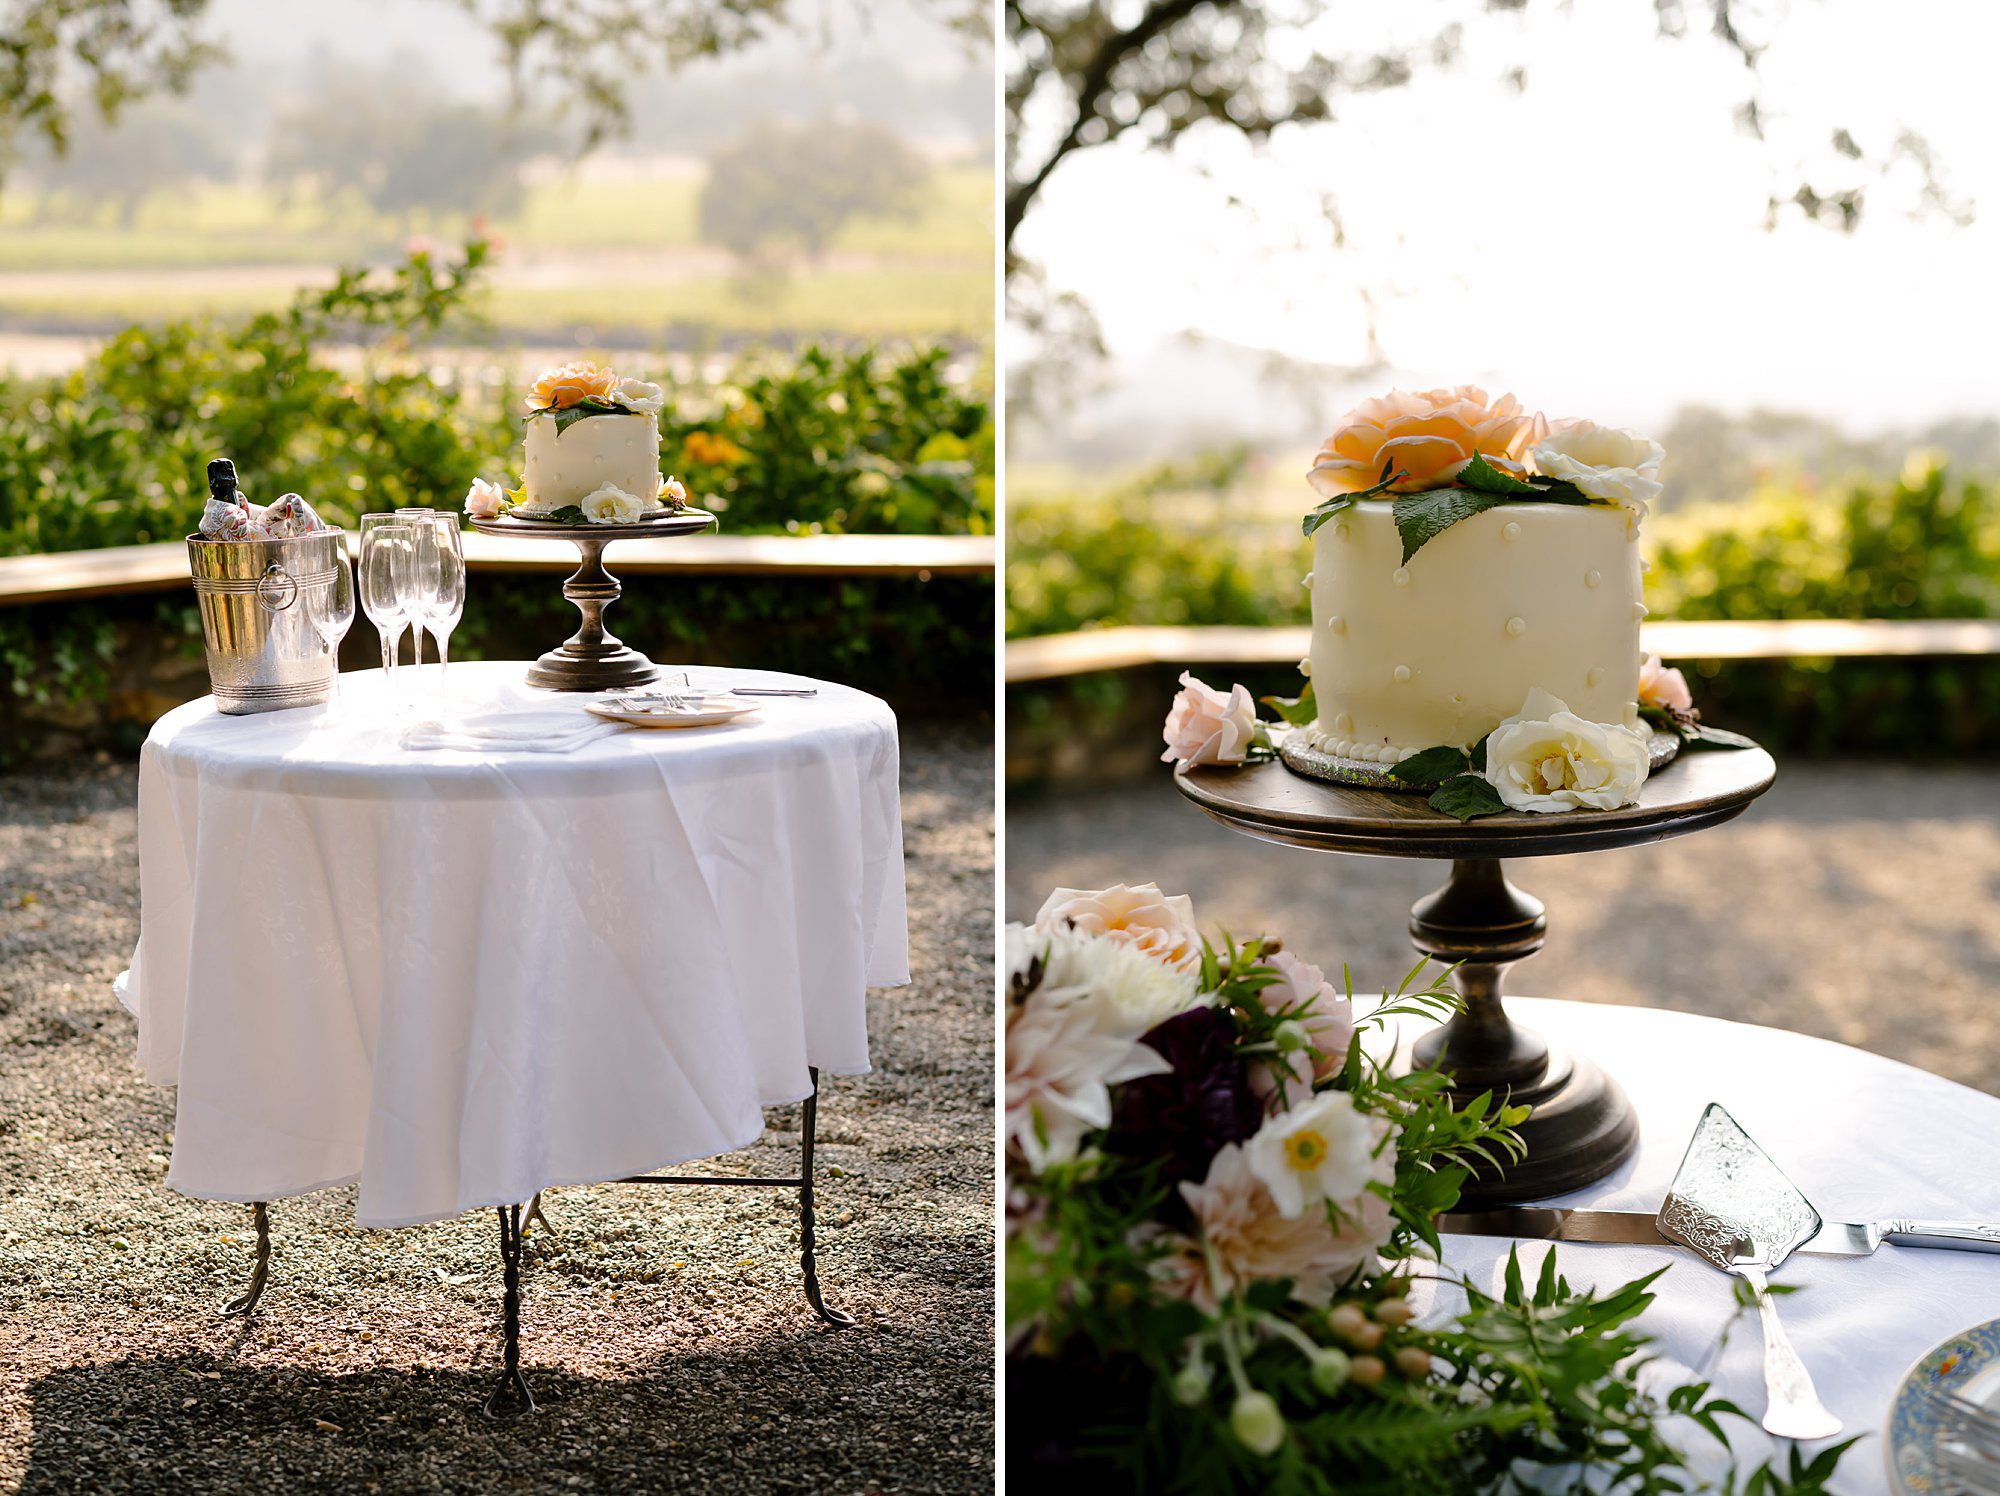 Side by side detail photos of petit cake on decorated with garden flowers and the table set with champage flutes for an elopement at Beltane Ranch in Glen Ellen